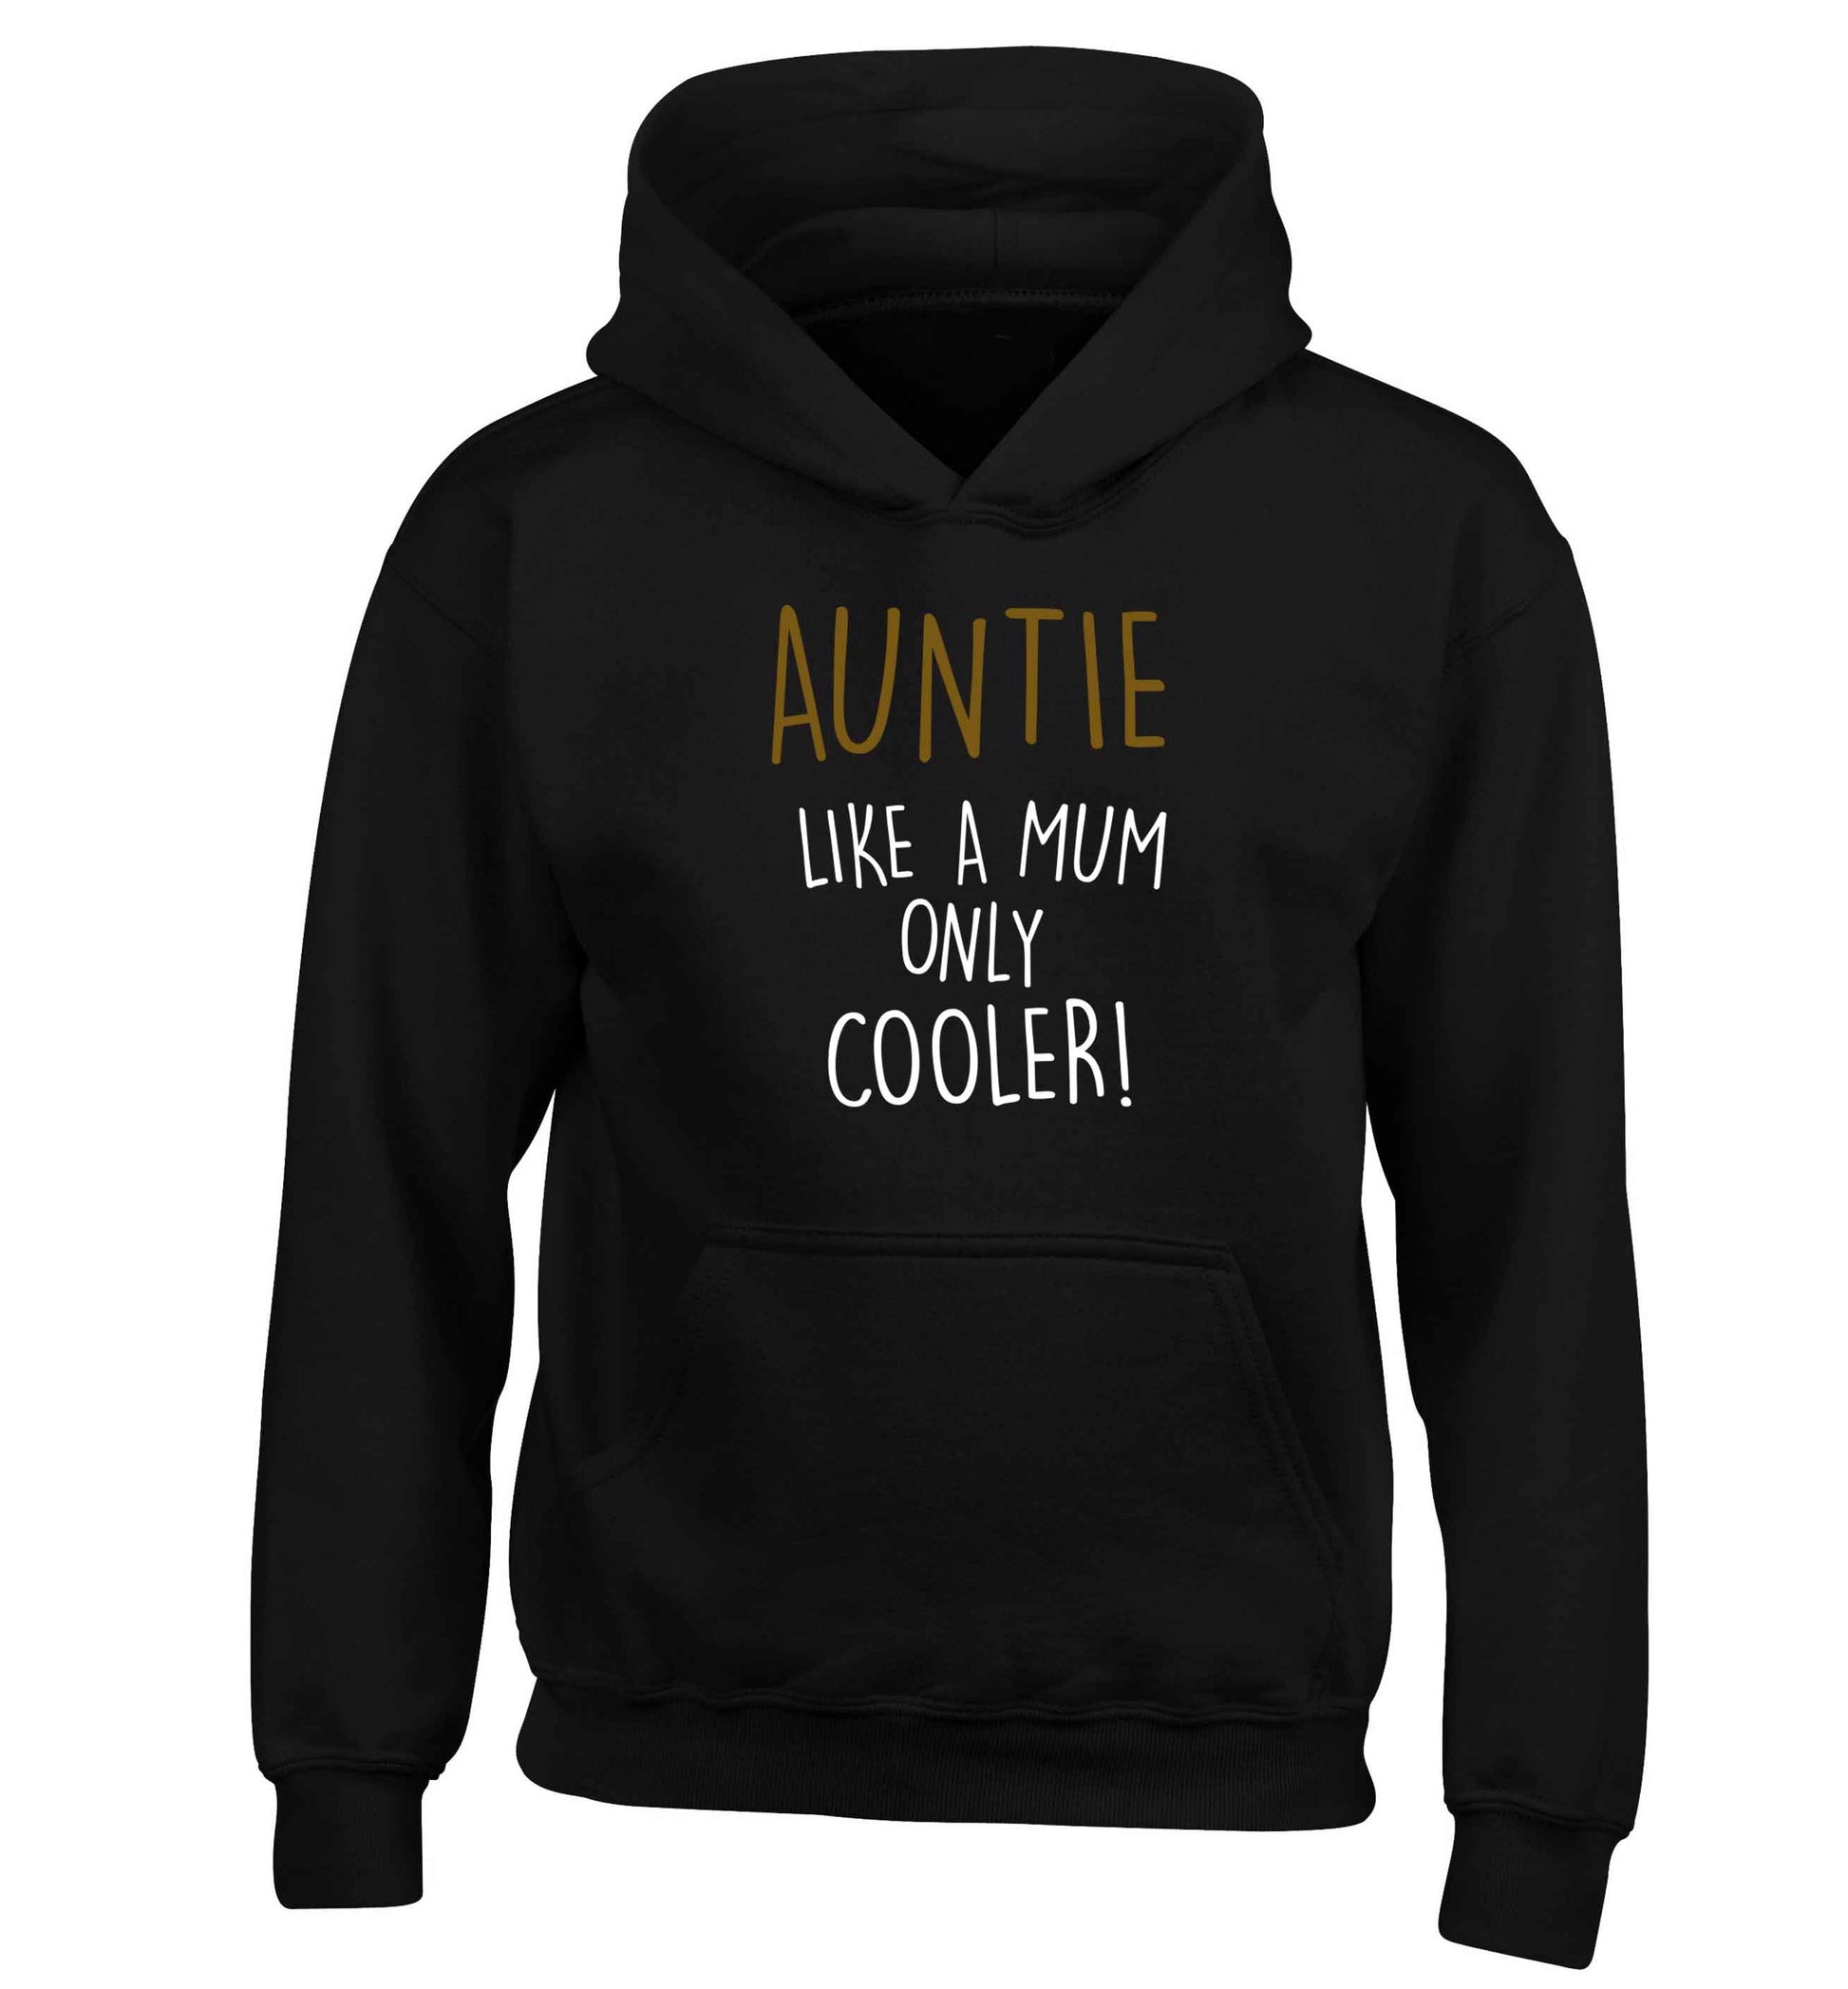 Auntie like a mum only cooler children's black hoodie 12-13 Years